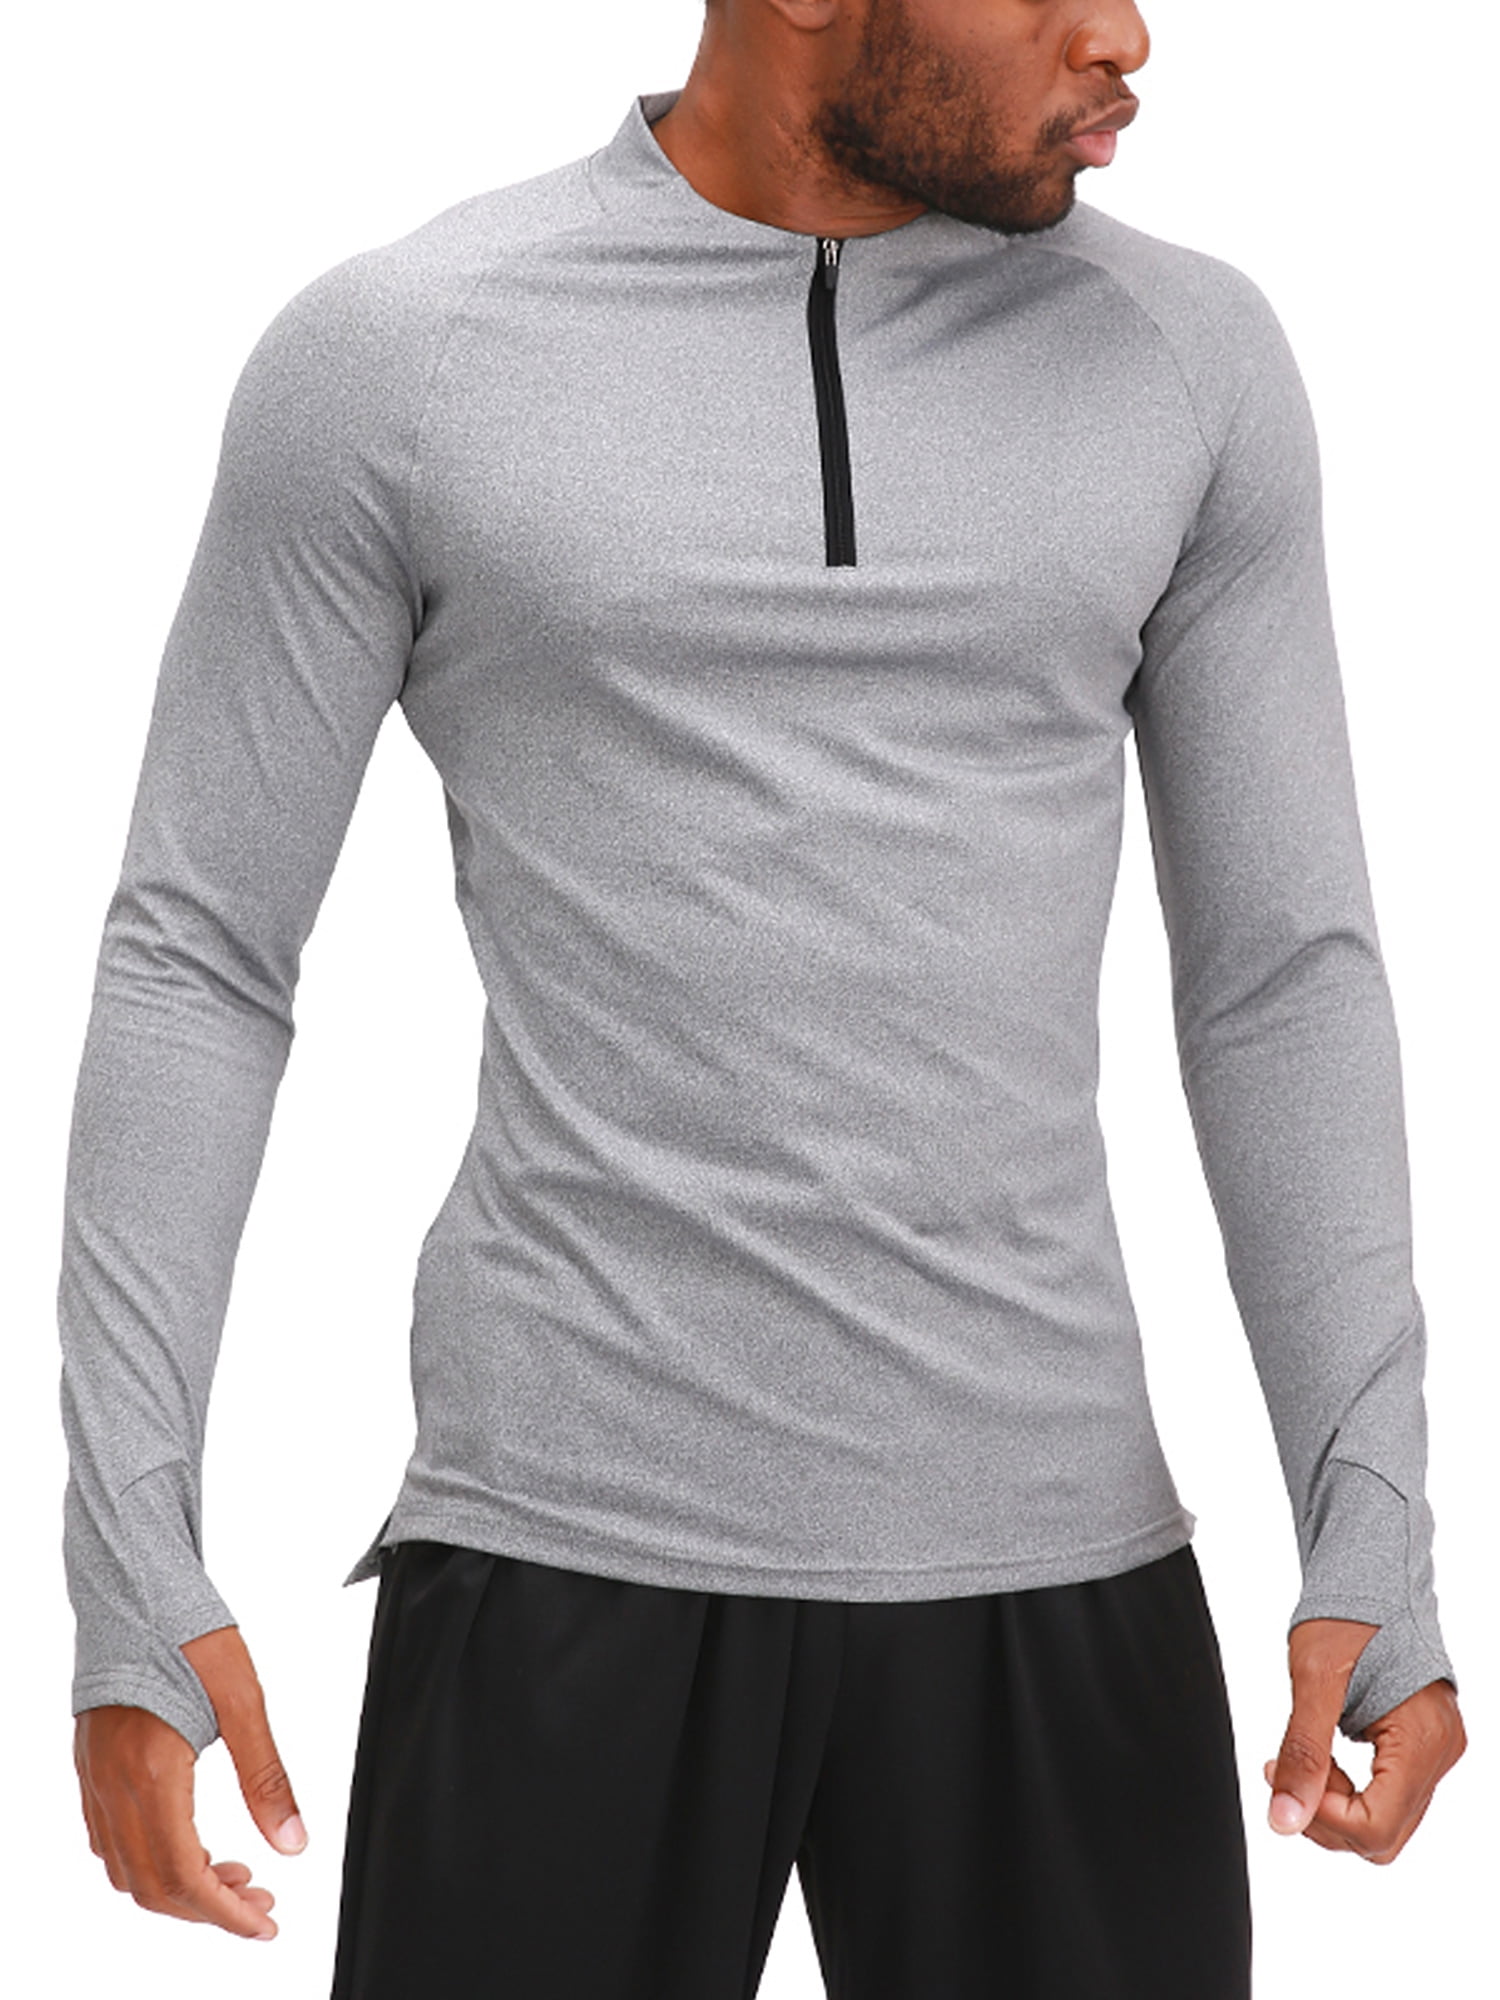 VANSYDICAL New Mens Quick Dry Running T-Shirts Compression Sports Tights Gym Short Sleeves Bodybuilding Layer Tops